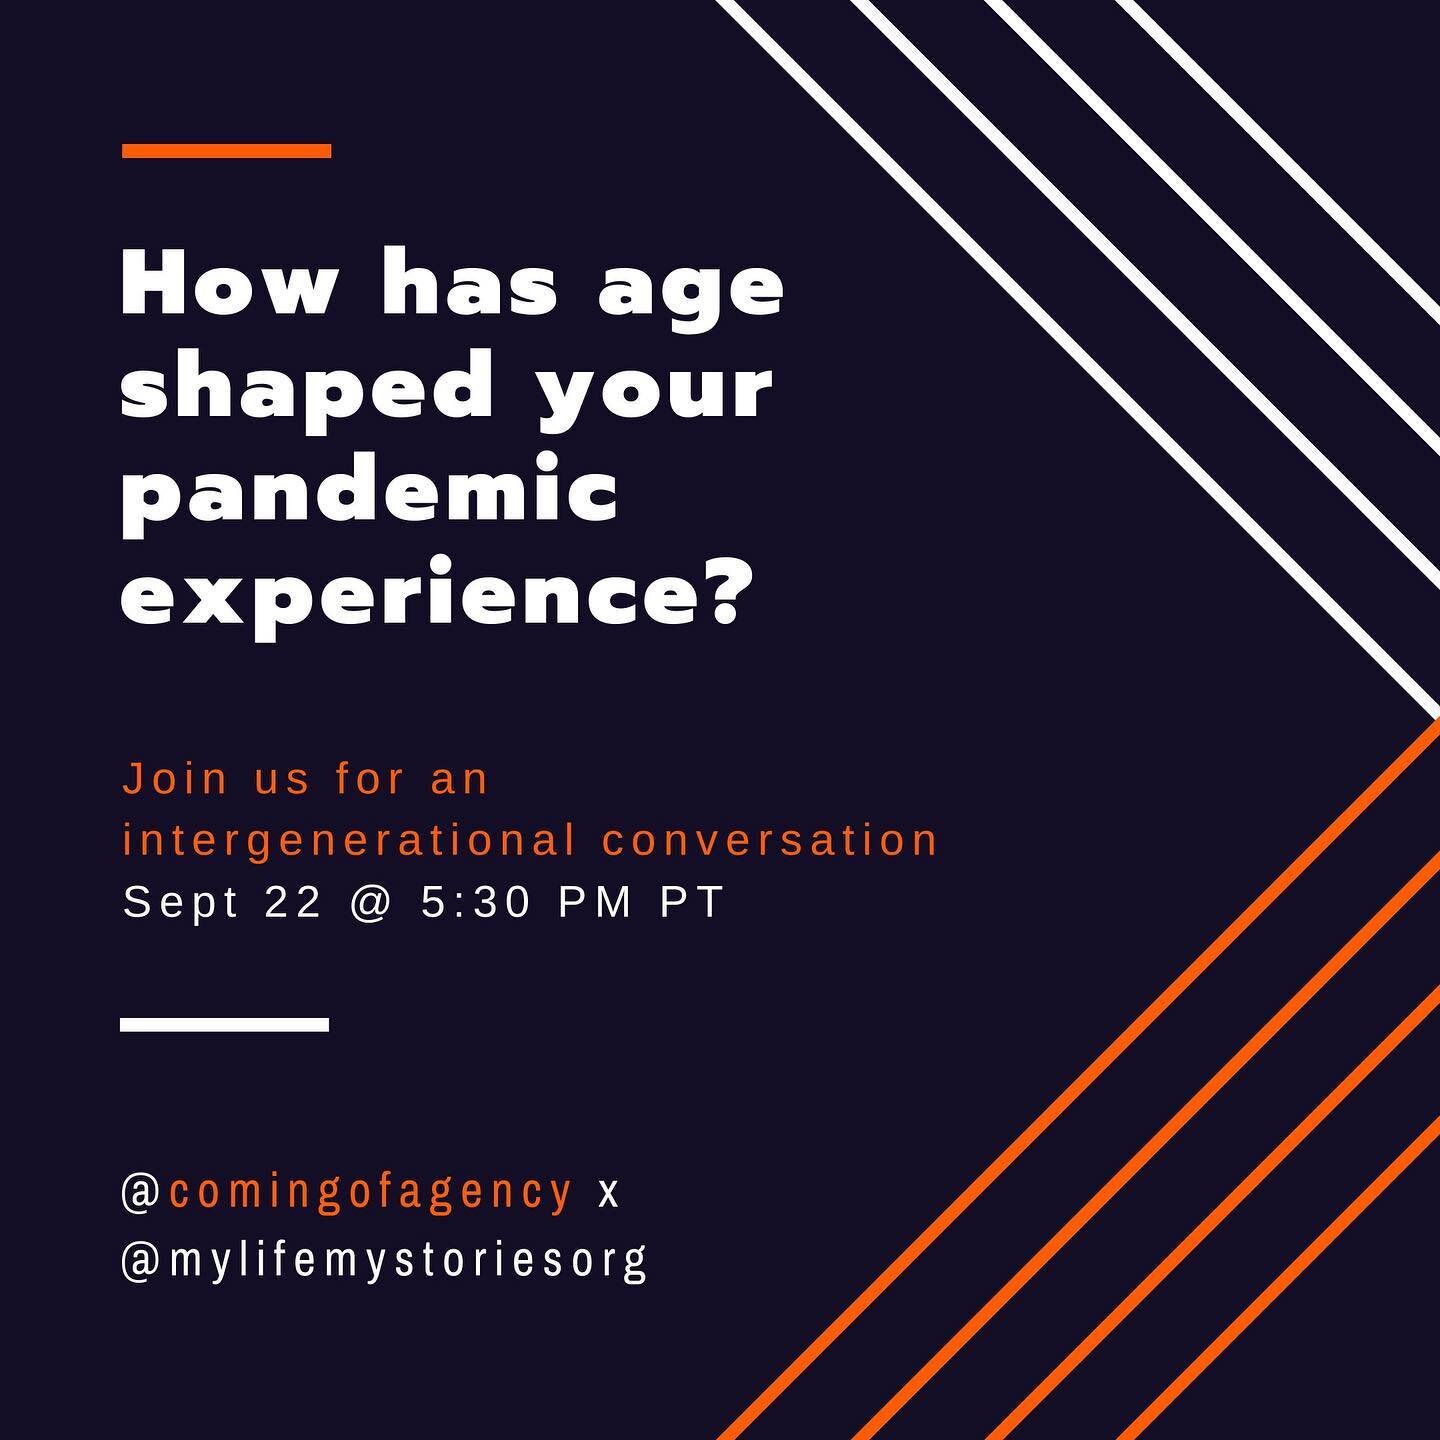 Join us and @comingofagency on Sept 22 for our next event where we&rsquo;ll share our unique experiences during the COVID pandemic. Some of our perspectives are shaped by our age. Learn from other generations about how they&rsquo;ve been affected. Li